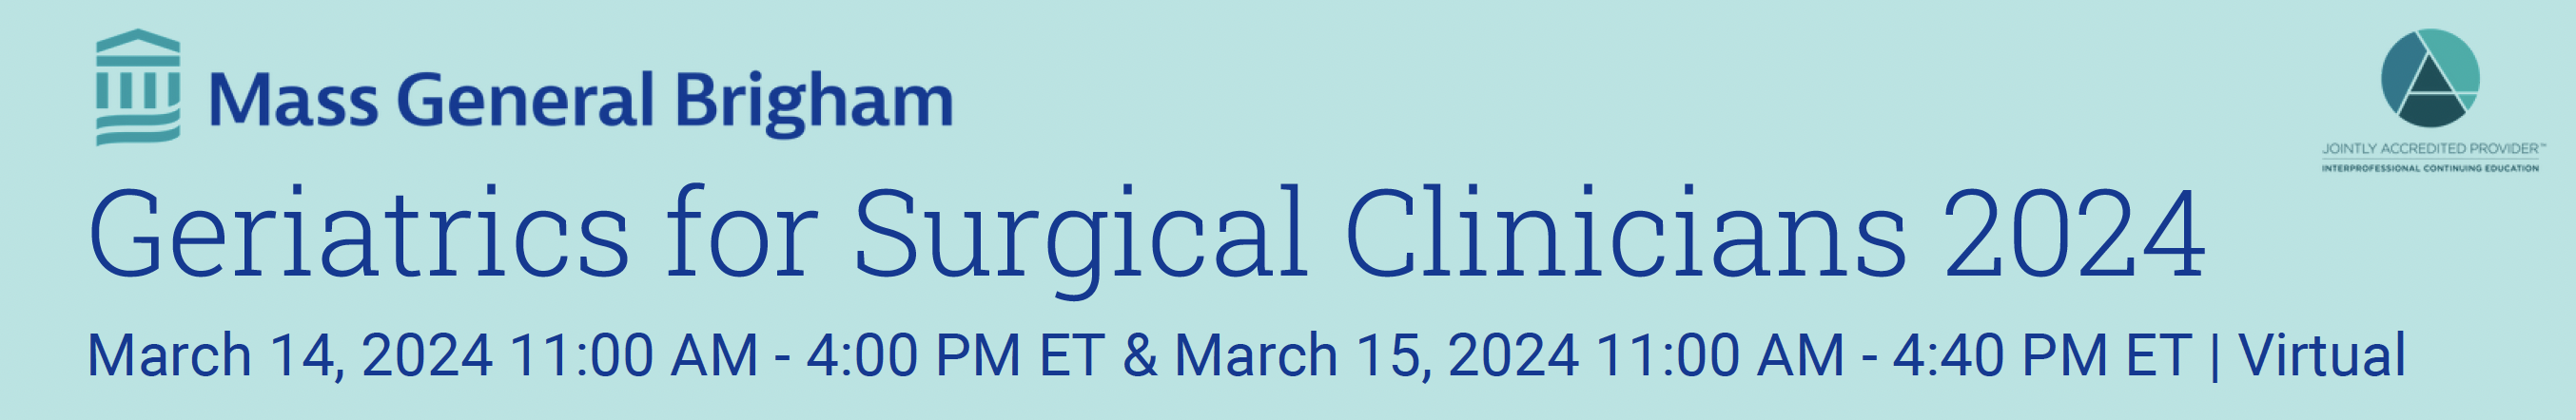 The Geriatrics for Surgical Clinicians virtual course will take place on March 14, 2024 from 11 AM to 4 PM ET and on March 15, 2024 from 11 AM to 4:40PM ET.